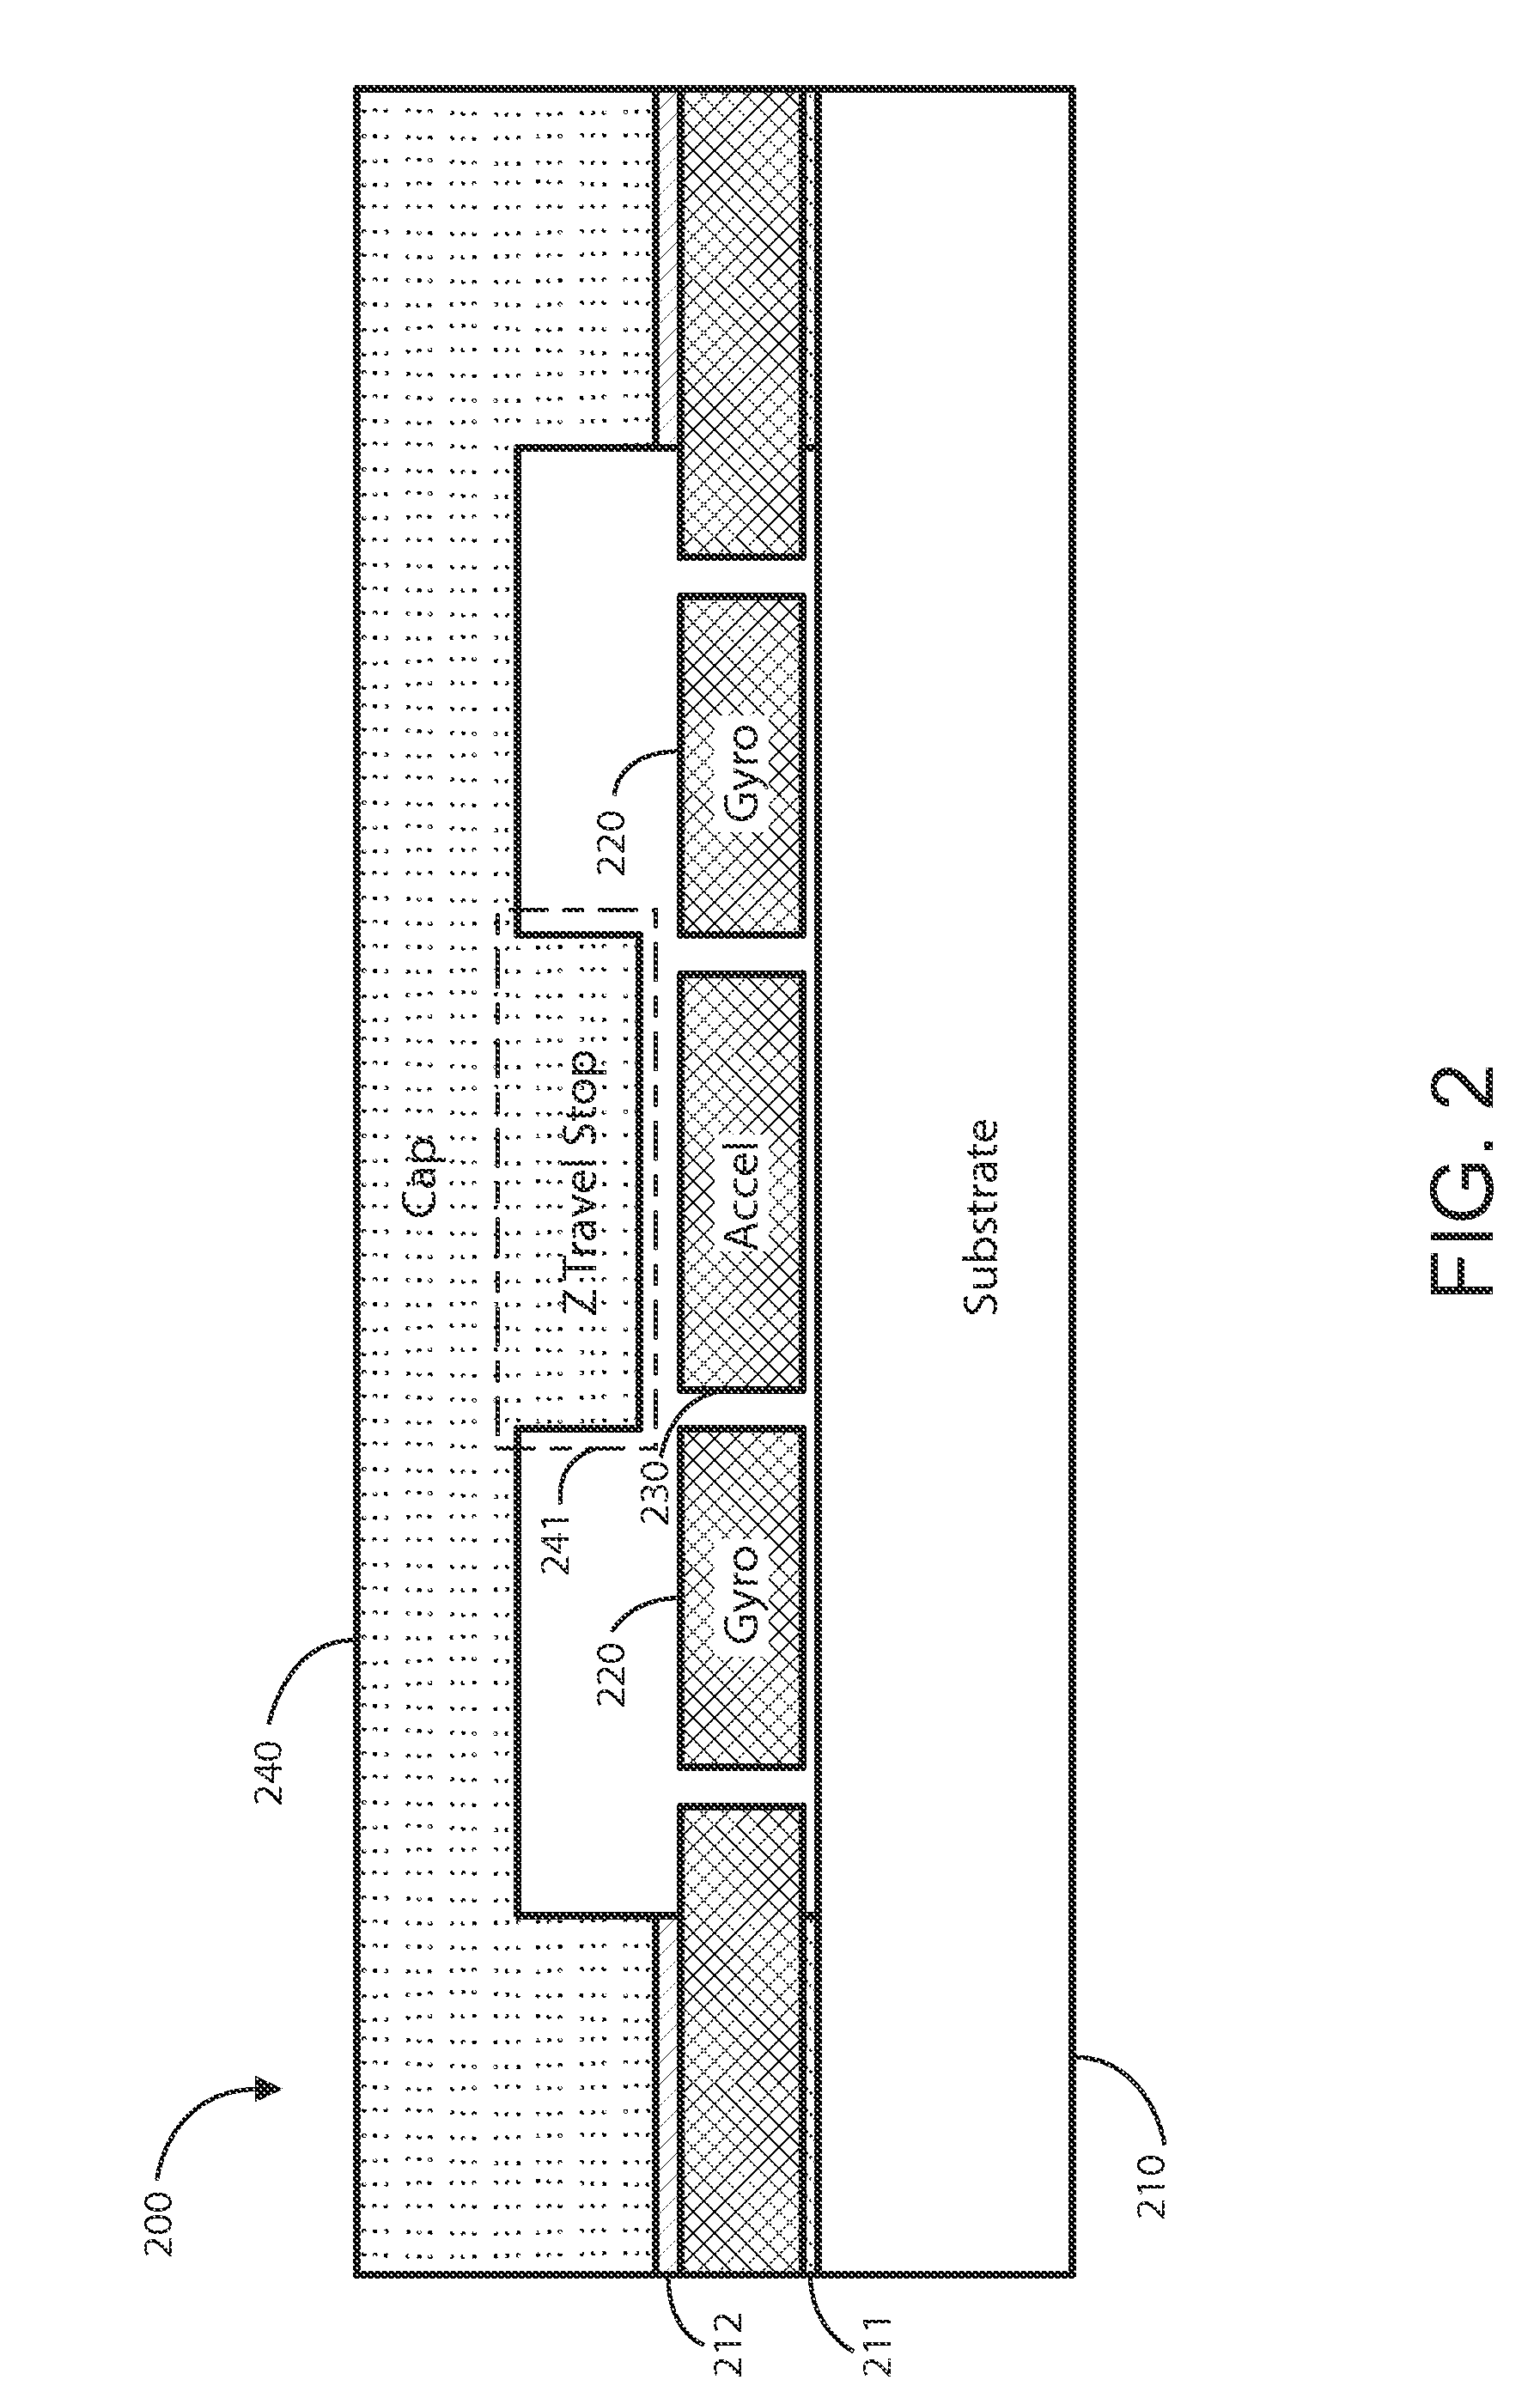 Multi-axis integrated MEMS inertial sensing device on single packaged chip